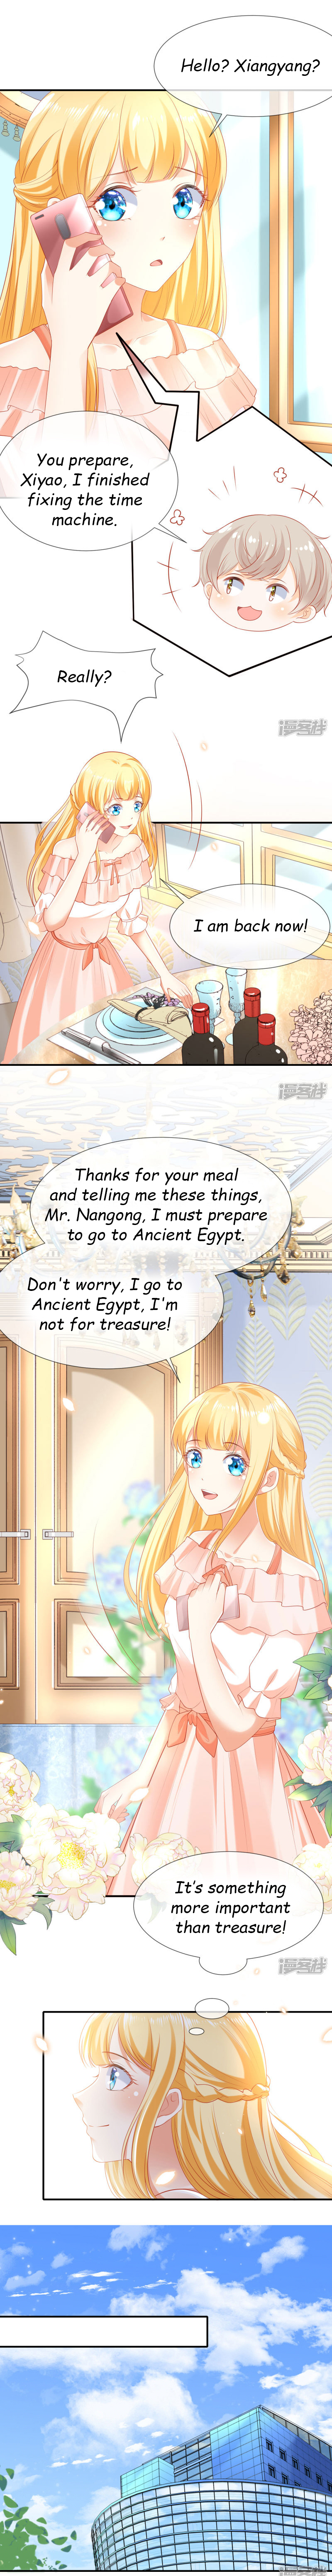 Pharaoh's First Favorite Queen - Page 2